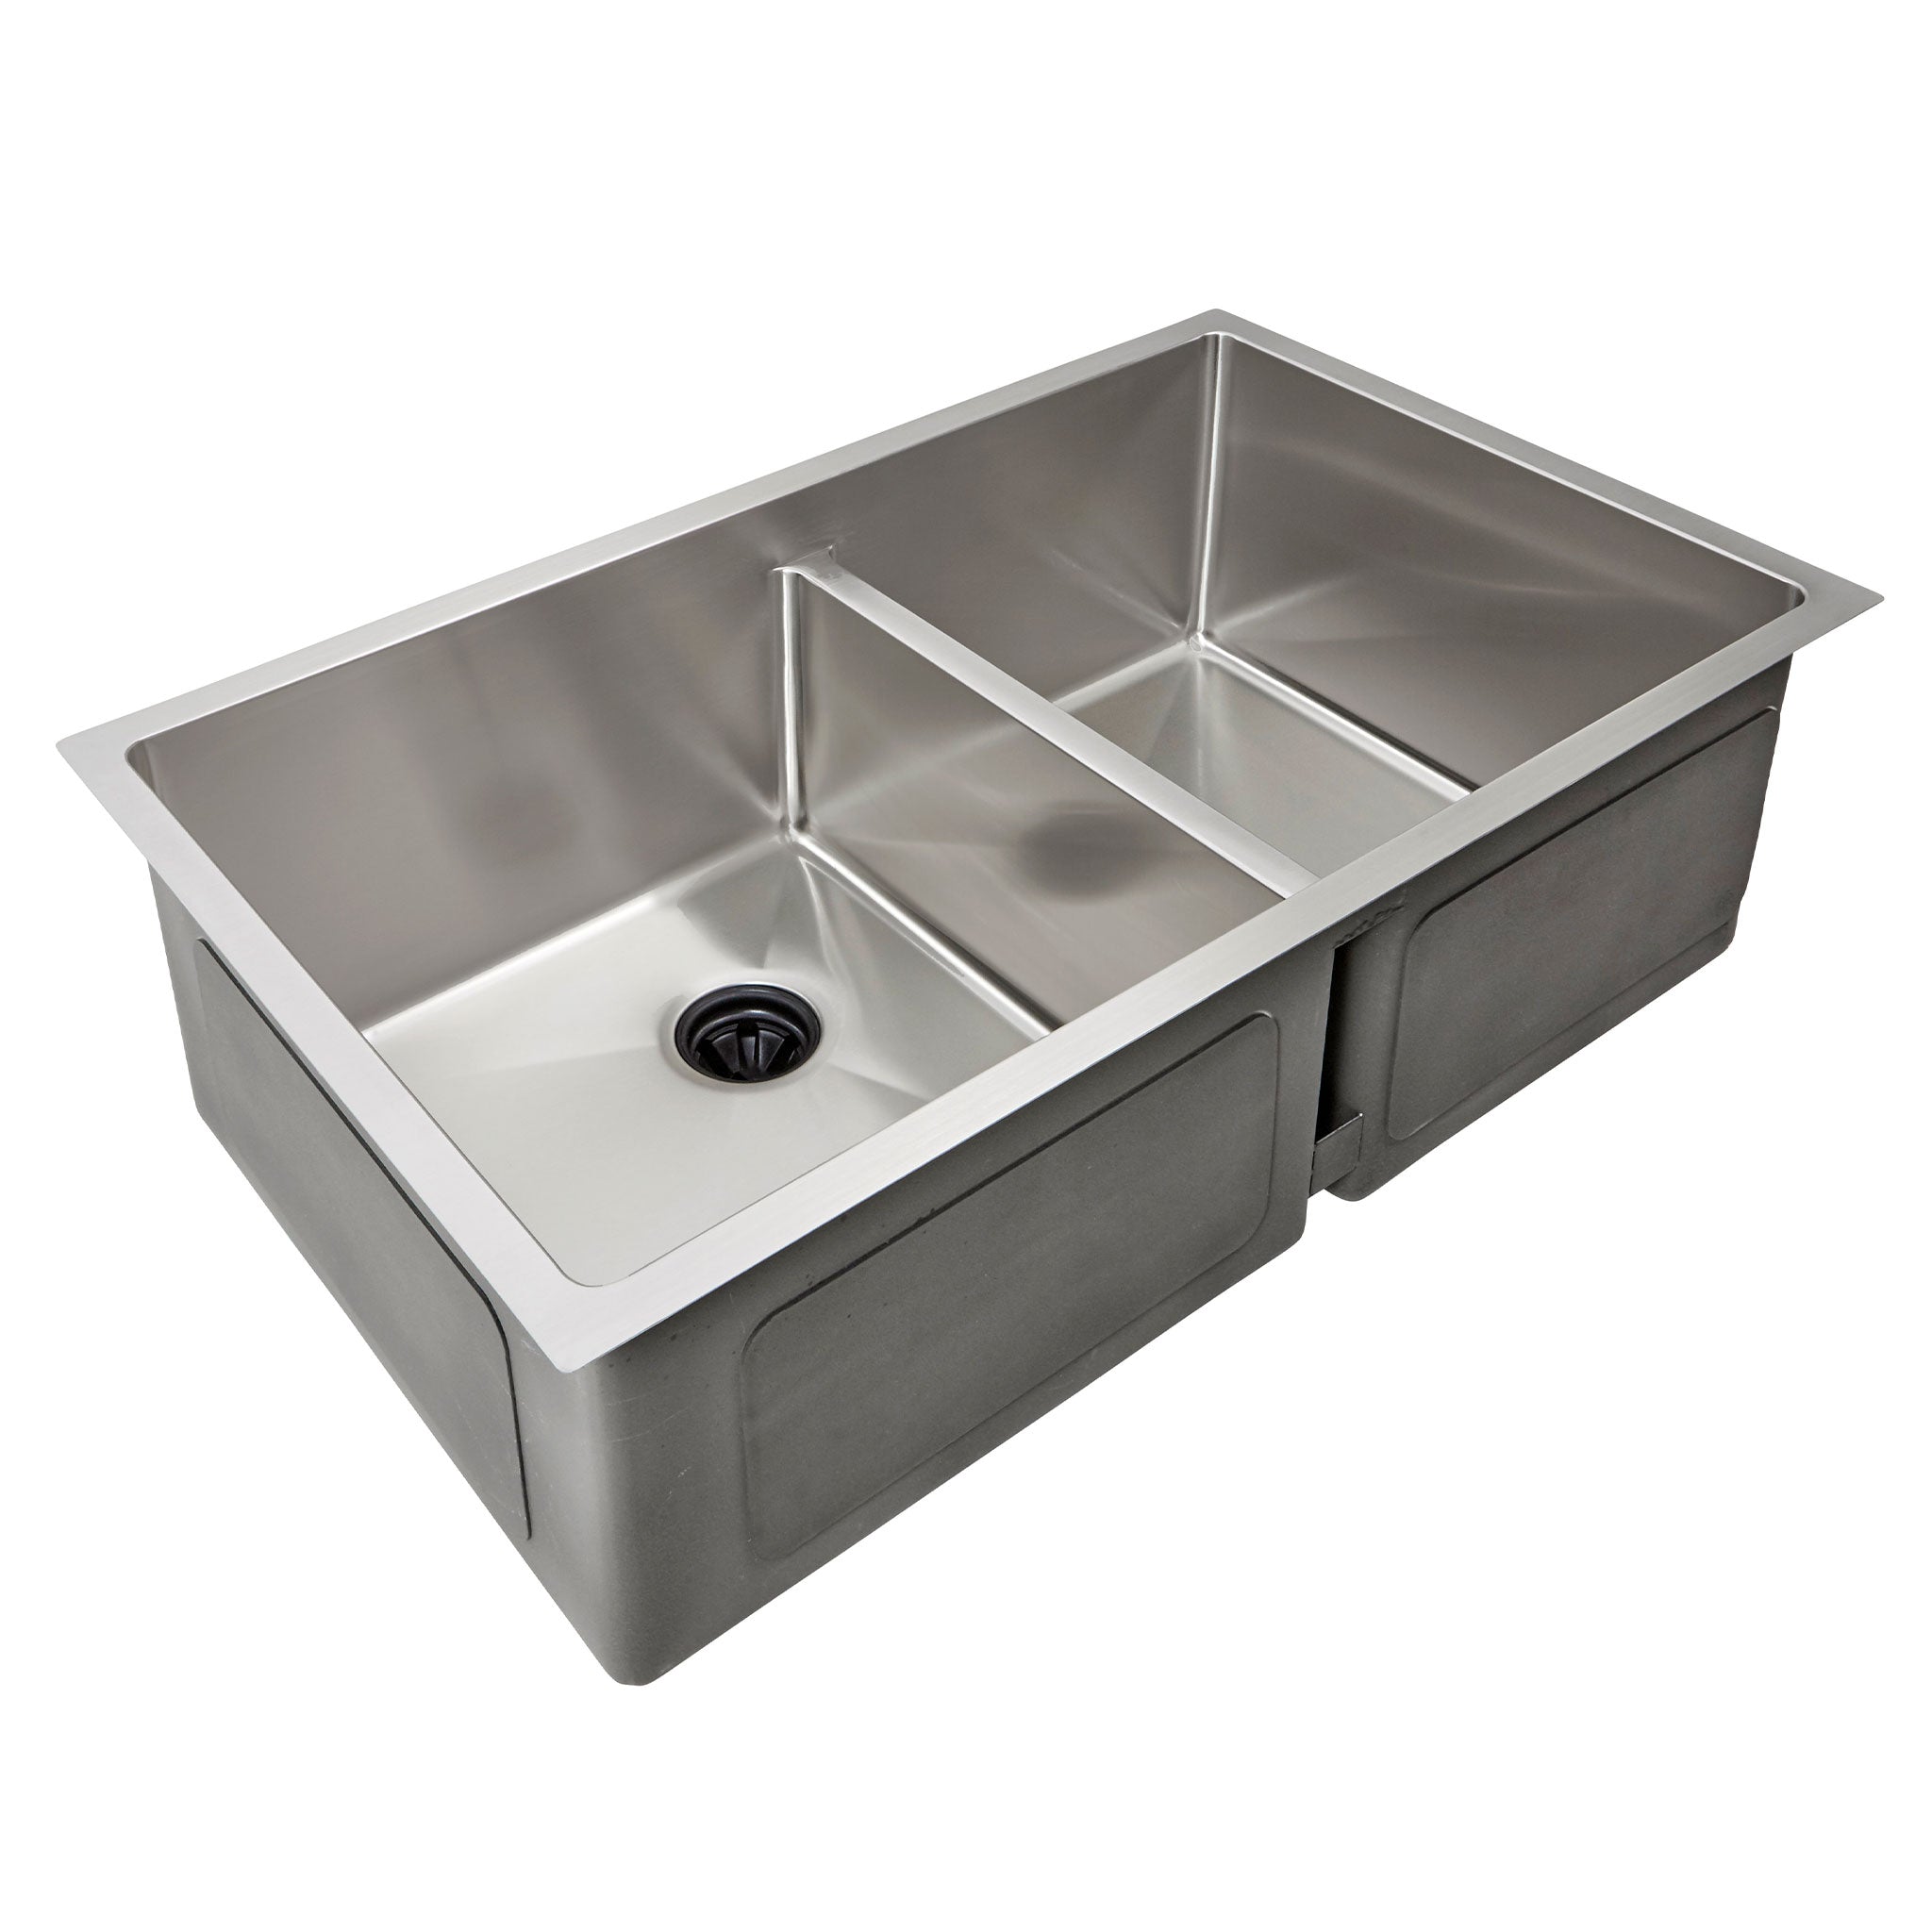 32 inch 16 gauge stainless steel undermount double basin kitchen sink with smart low divide and 60/40 split